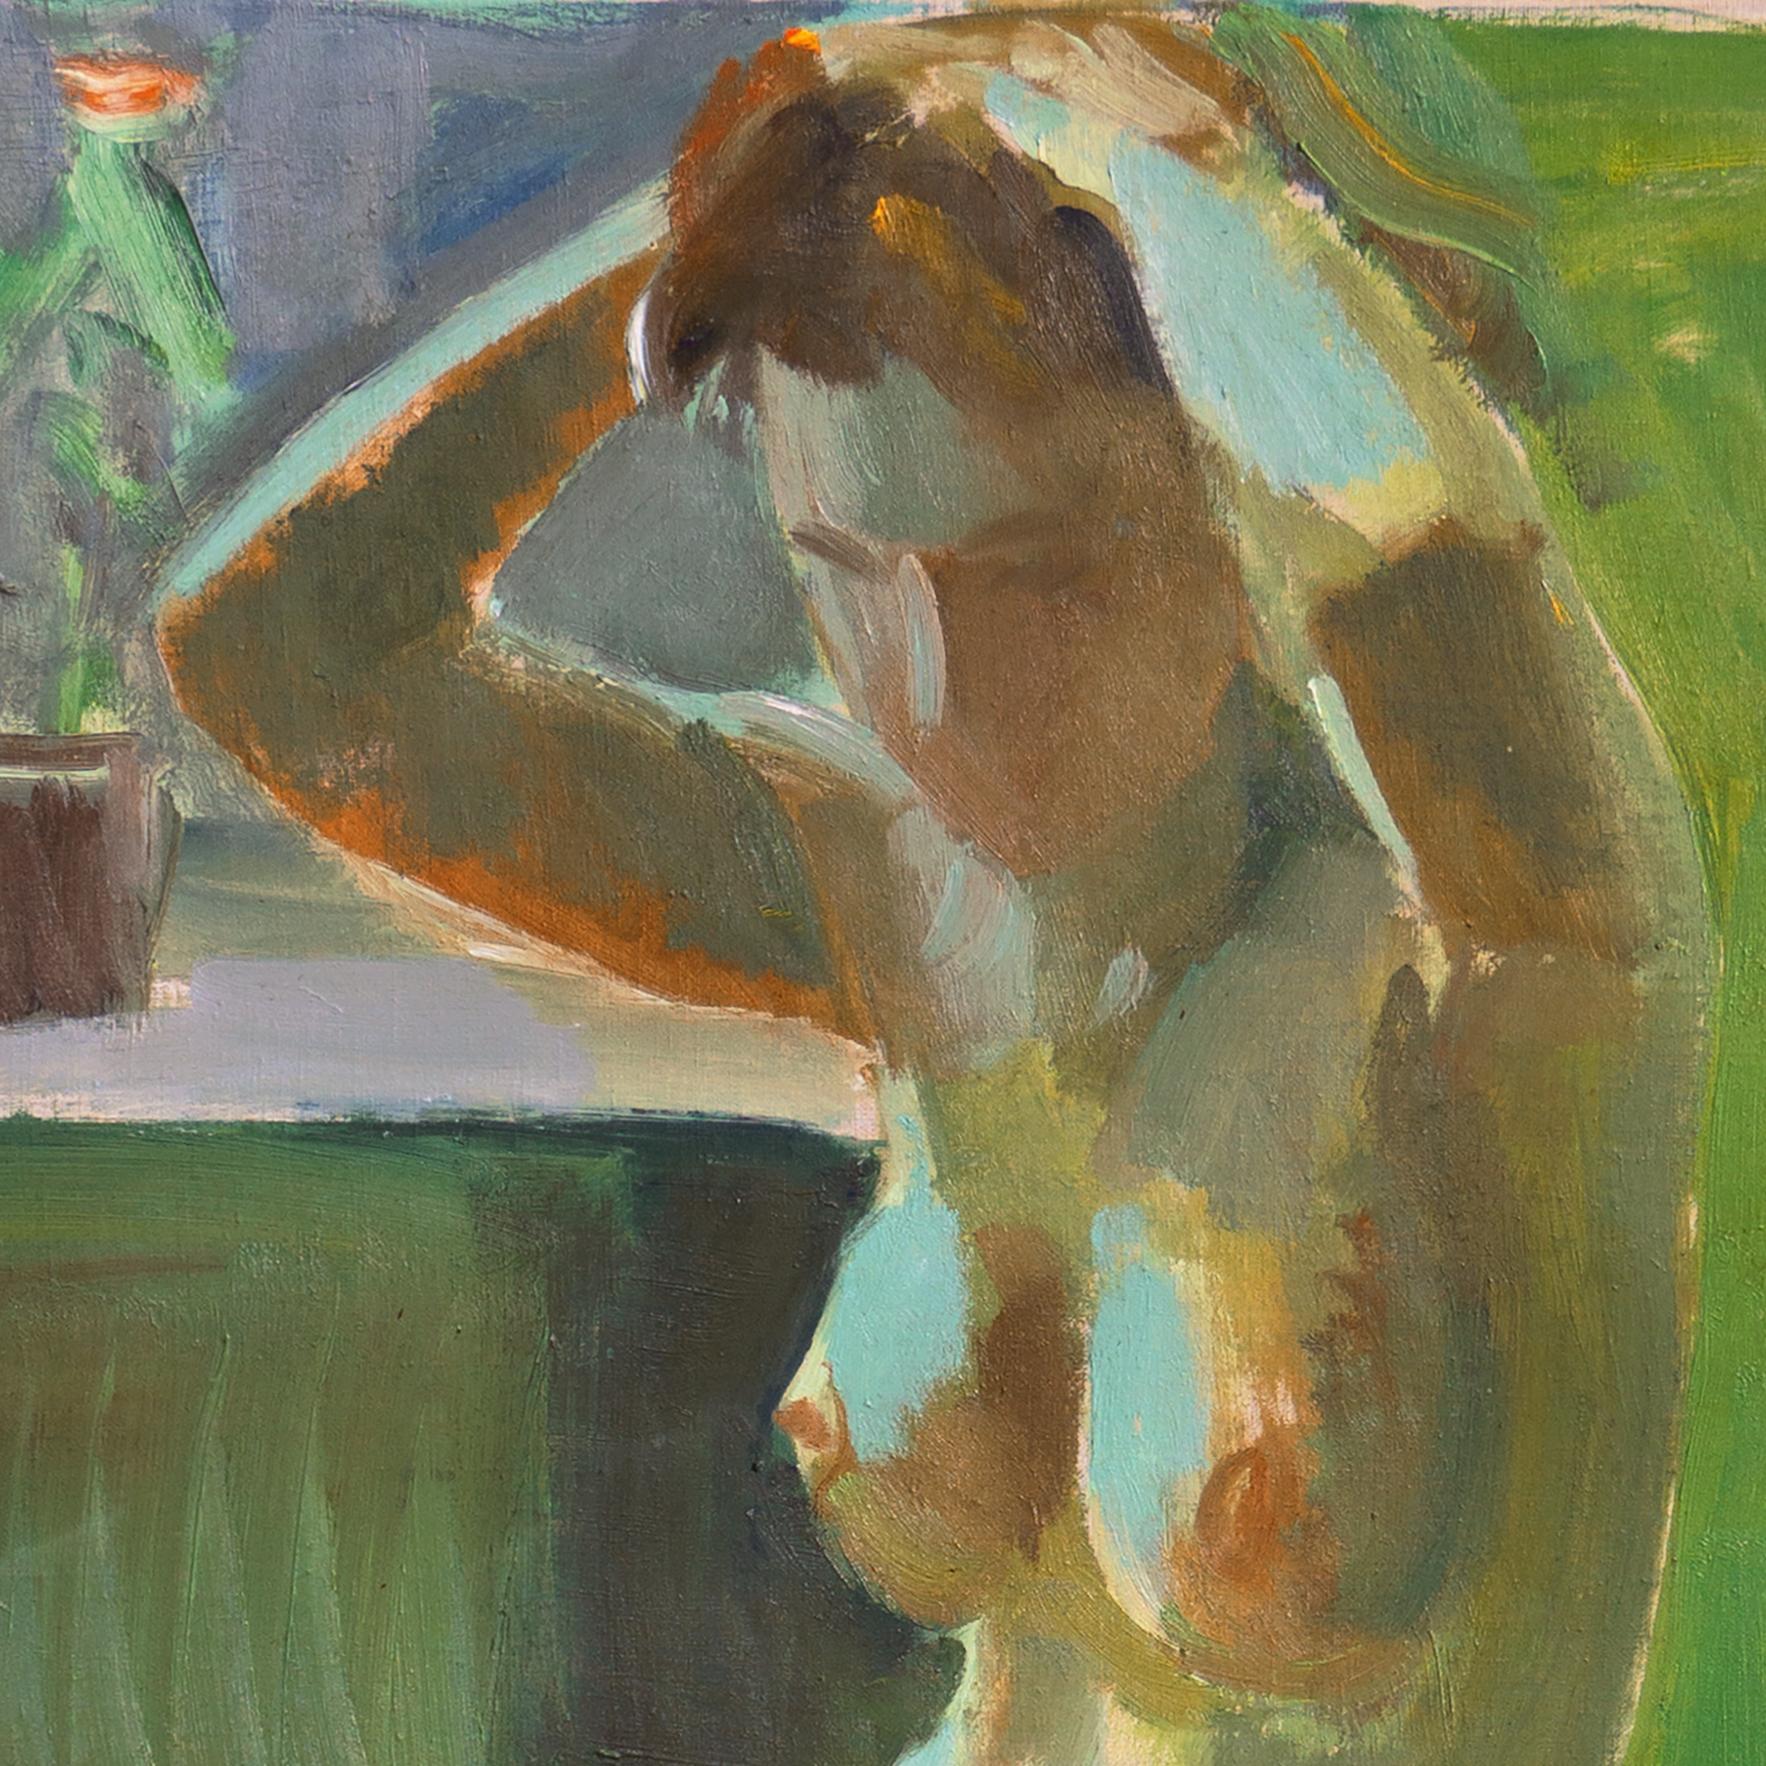 'Seated Nude',  Paris, Salon d'Automne, Royal Danish Academy, Expressionist Oil - Post-Impressionist Painting by Robert Leepin